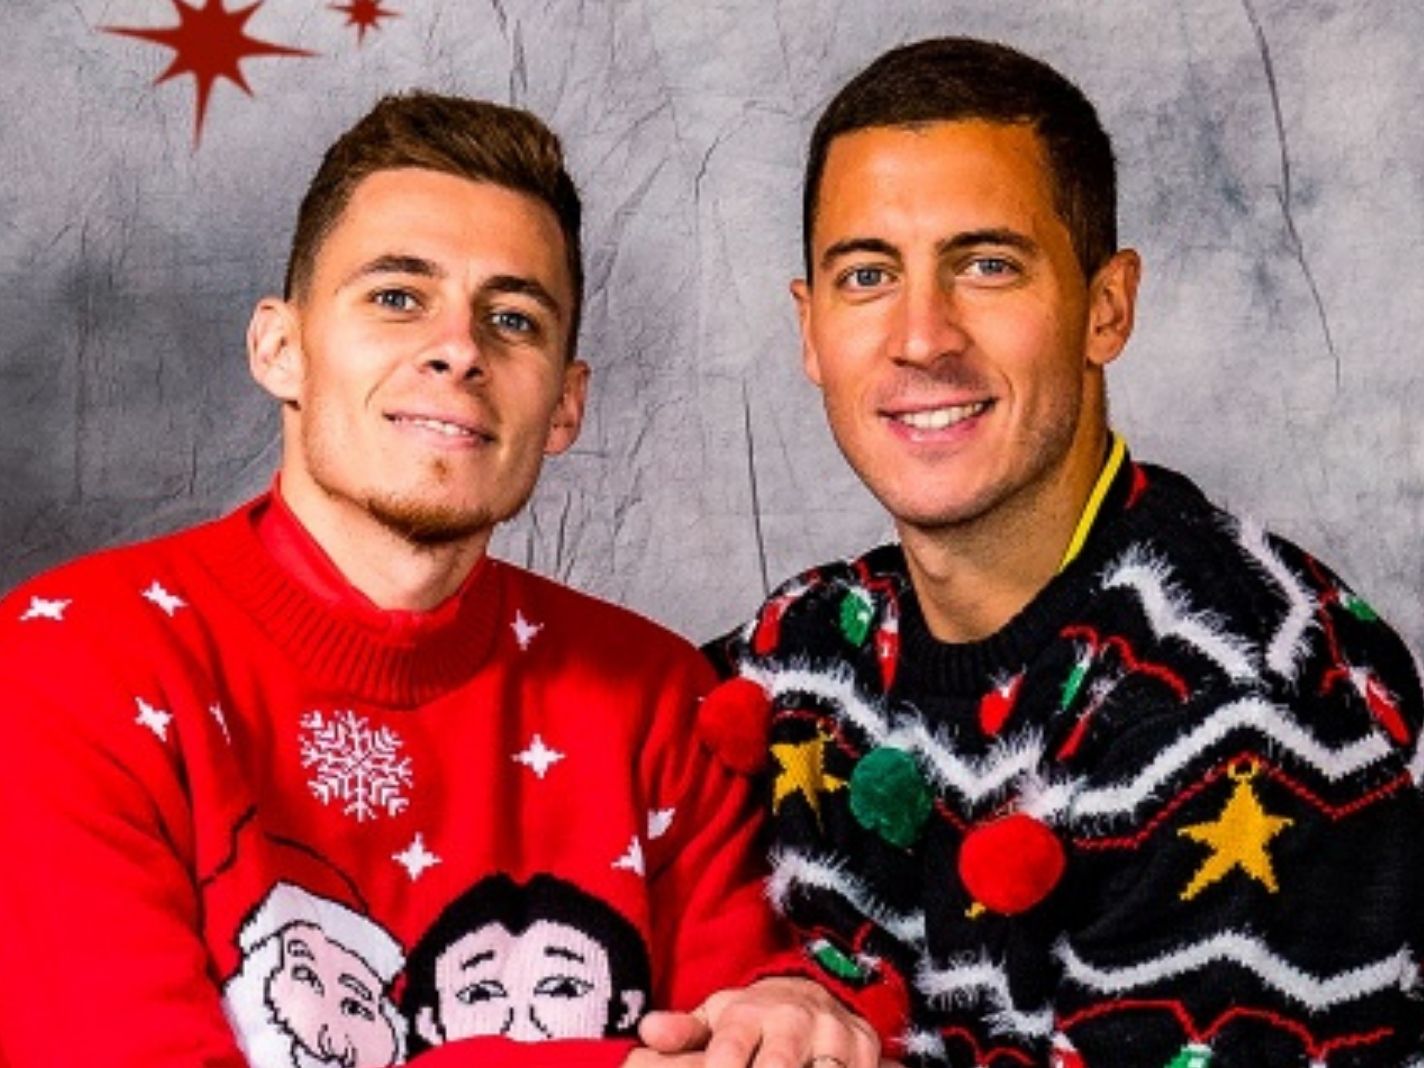 Eden Hazard poses with brother Thorgan in goofy Christmas photo